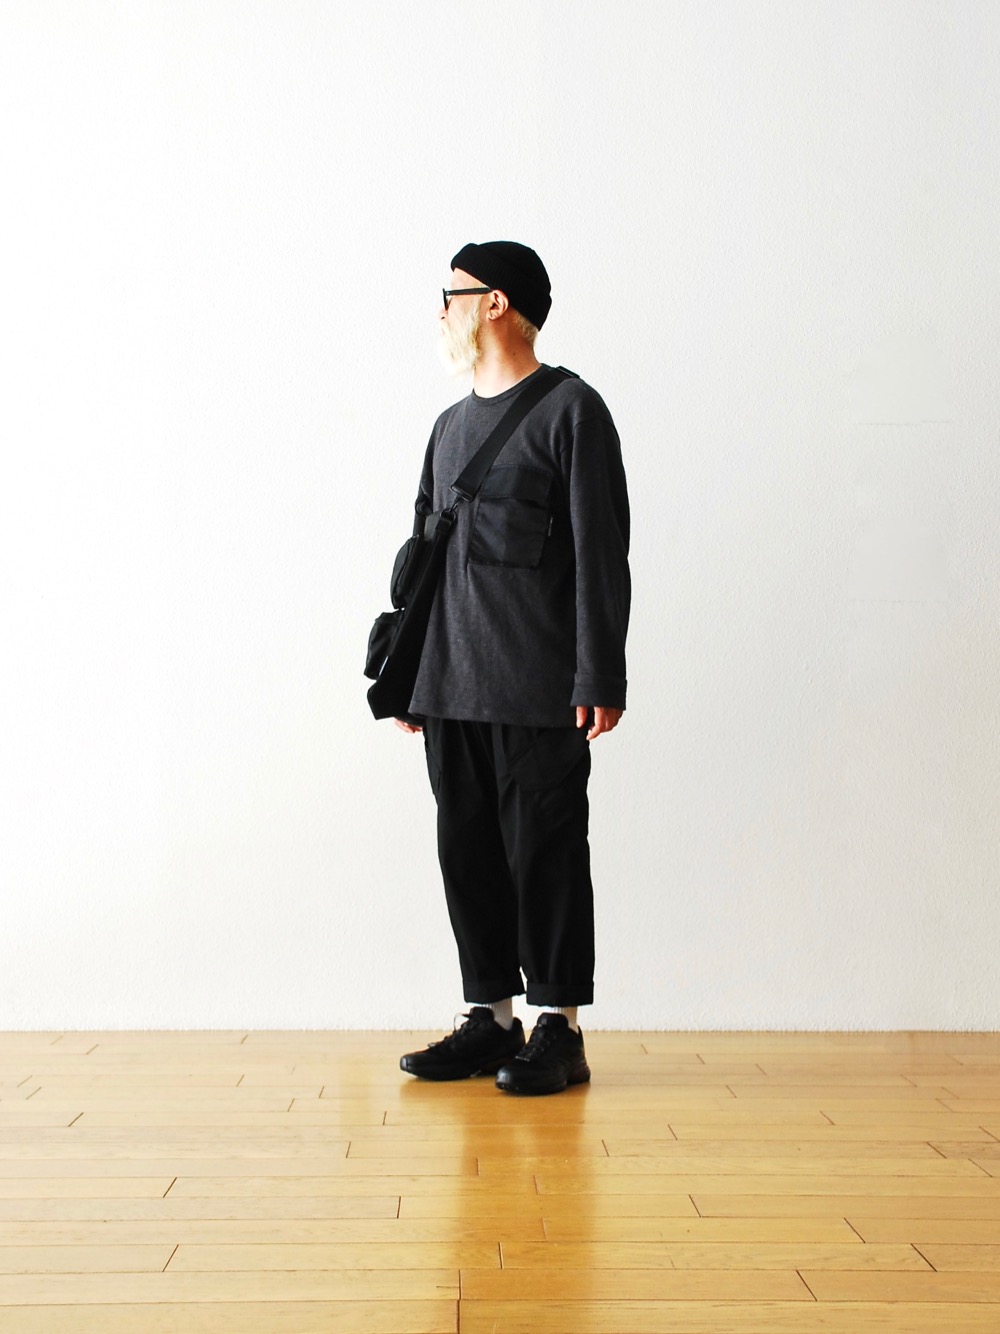 COMME des GARCONS HOMMEの新作たちをご紹介！〜COMME des GARCONS 